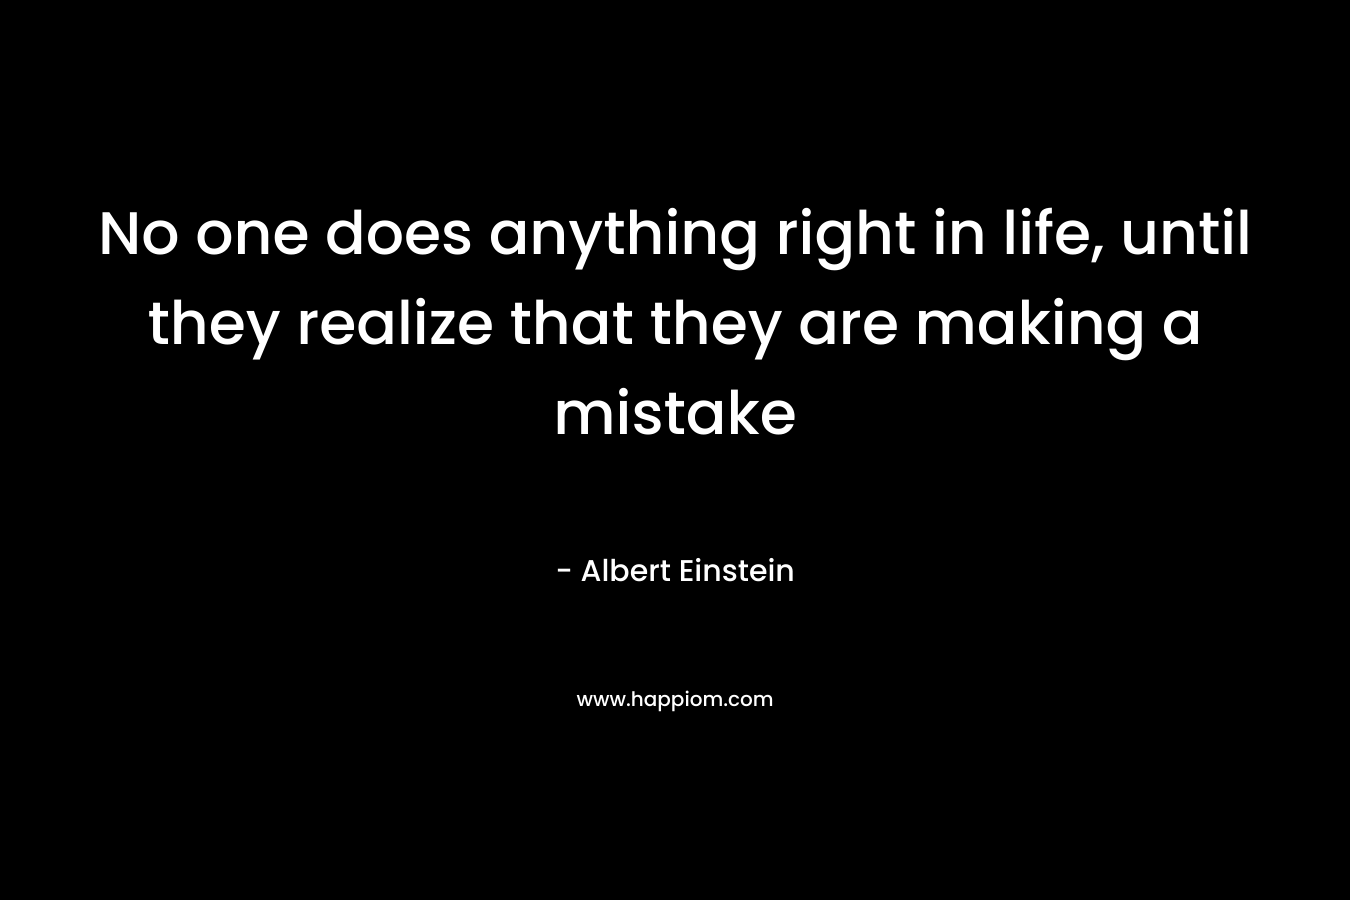 No one does anything right in life, until they realize that they are making a mistake